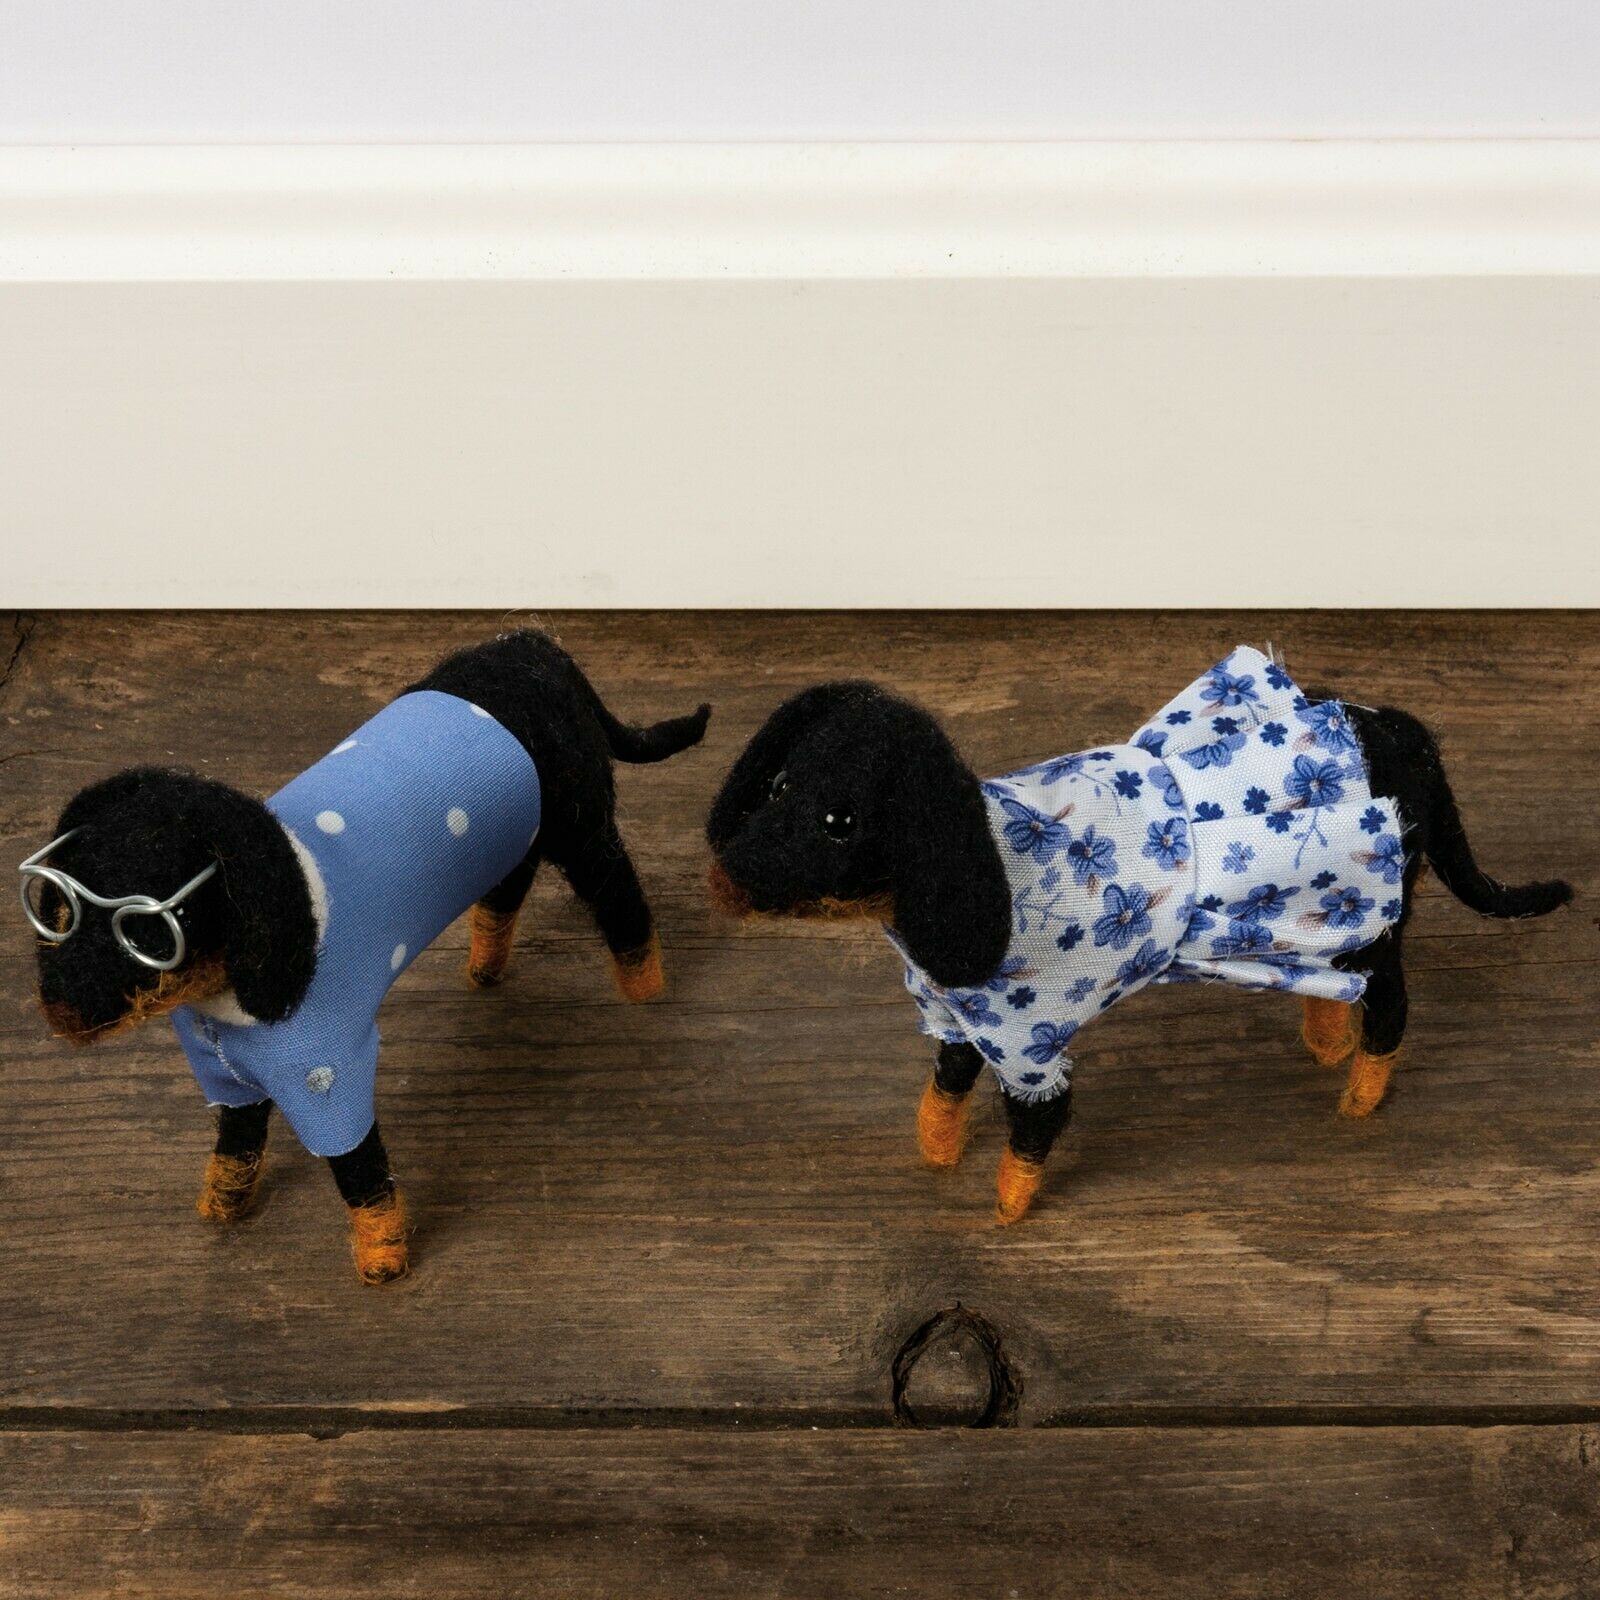 Primitive Rustic 2 pc Felted Dachshund Dog Ornaments Boy/Girl - The Primitive Pineapple Collection